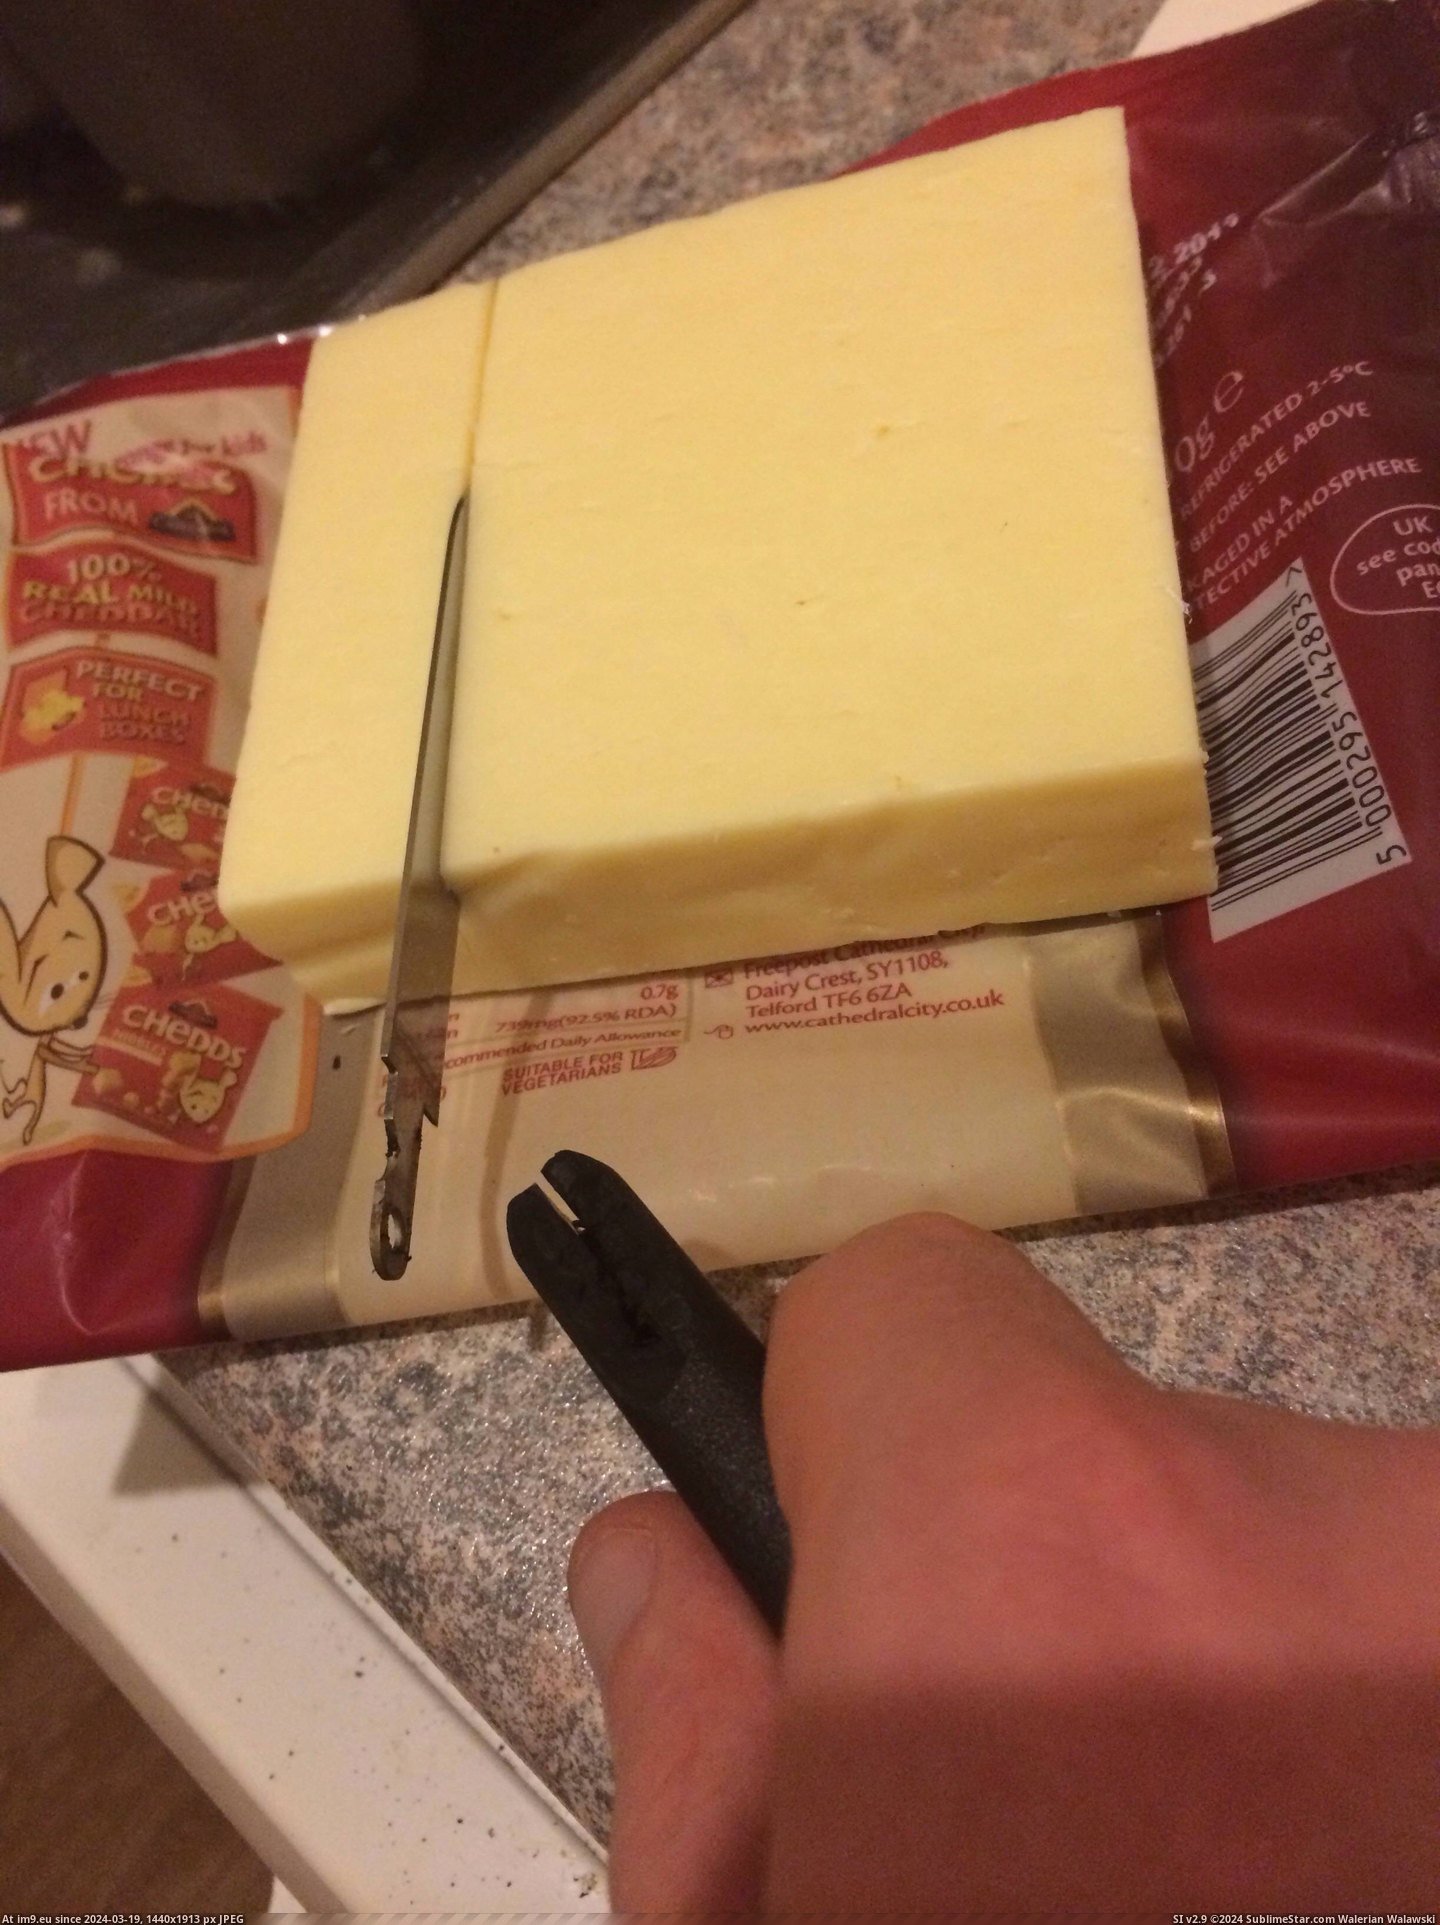 #Funny #Win #Cheese #You [Funny] You win this round, cheese... Pic. (Изображение из альбом My r/FUNNY favs))